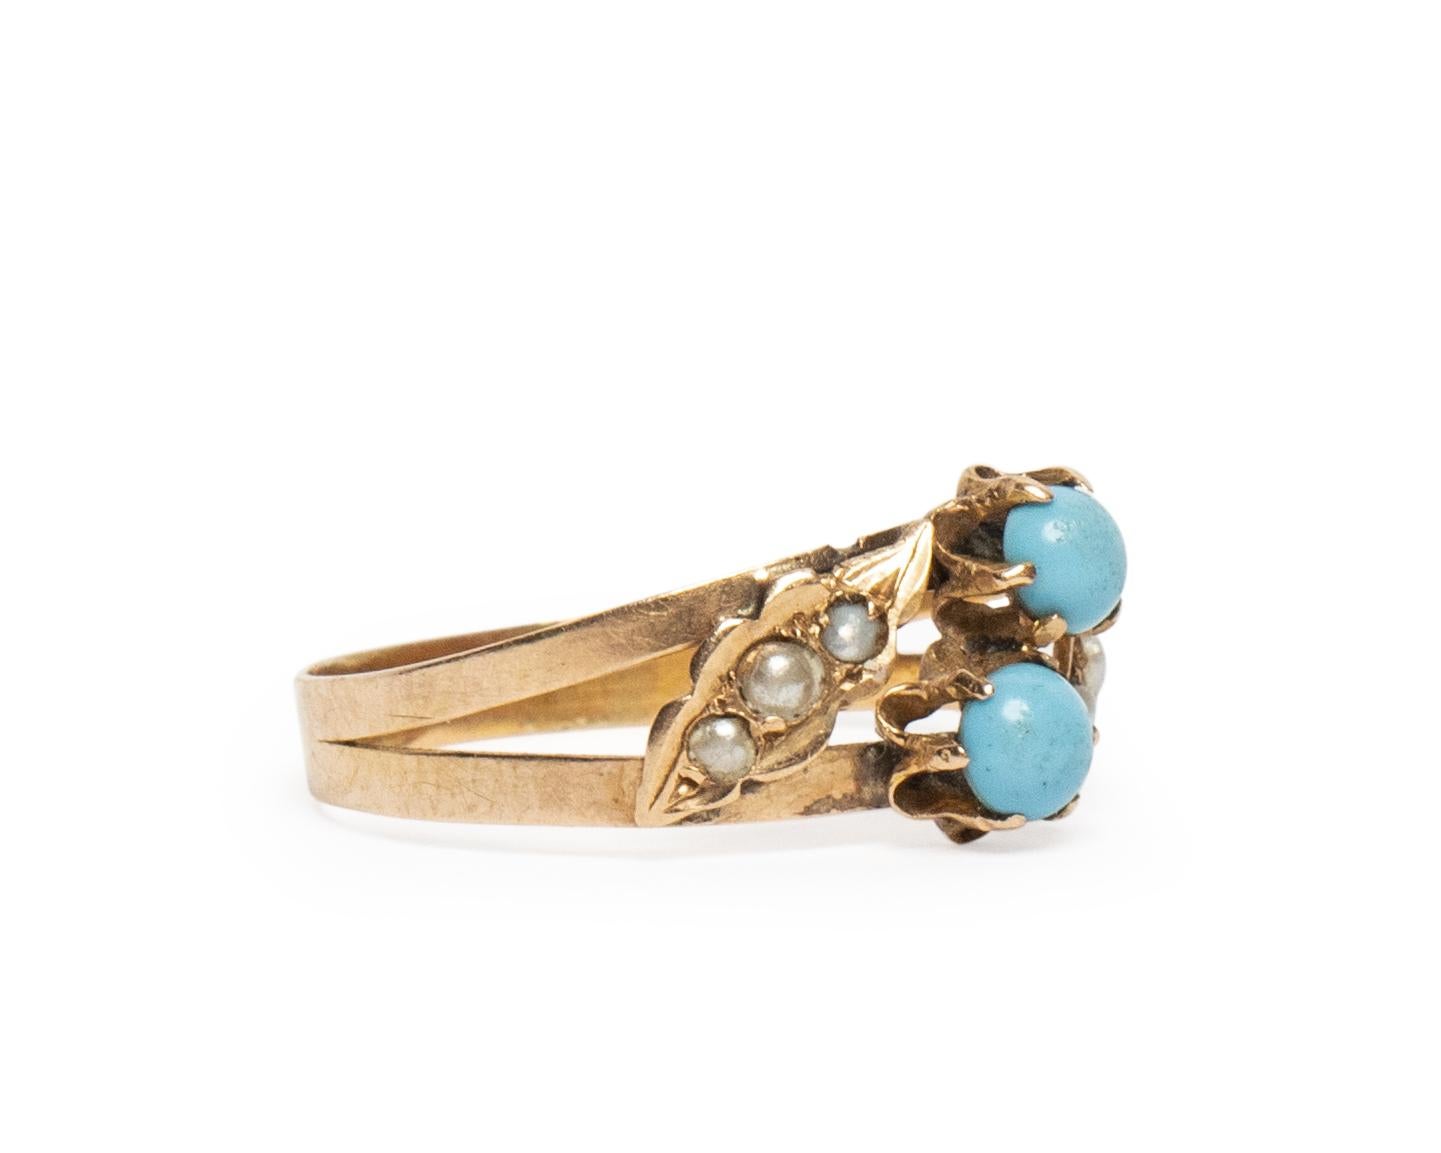 Round Cut 18 Karat Yellow Gold Persian Turquoise and Seed Pearl Fashion Ring, circa 1900s